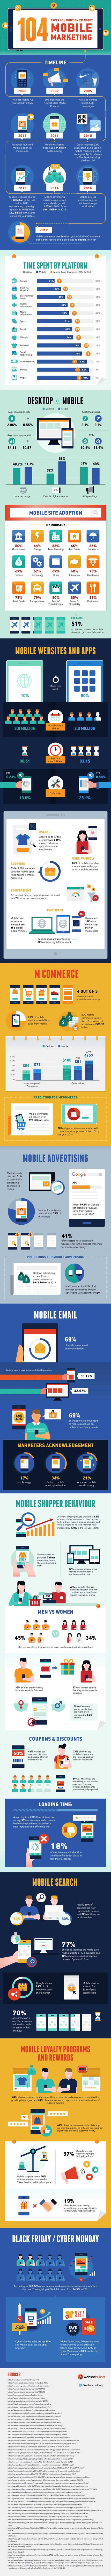 104 Facts You Don’t Know About Mobile Marketing